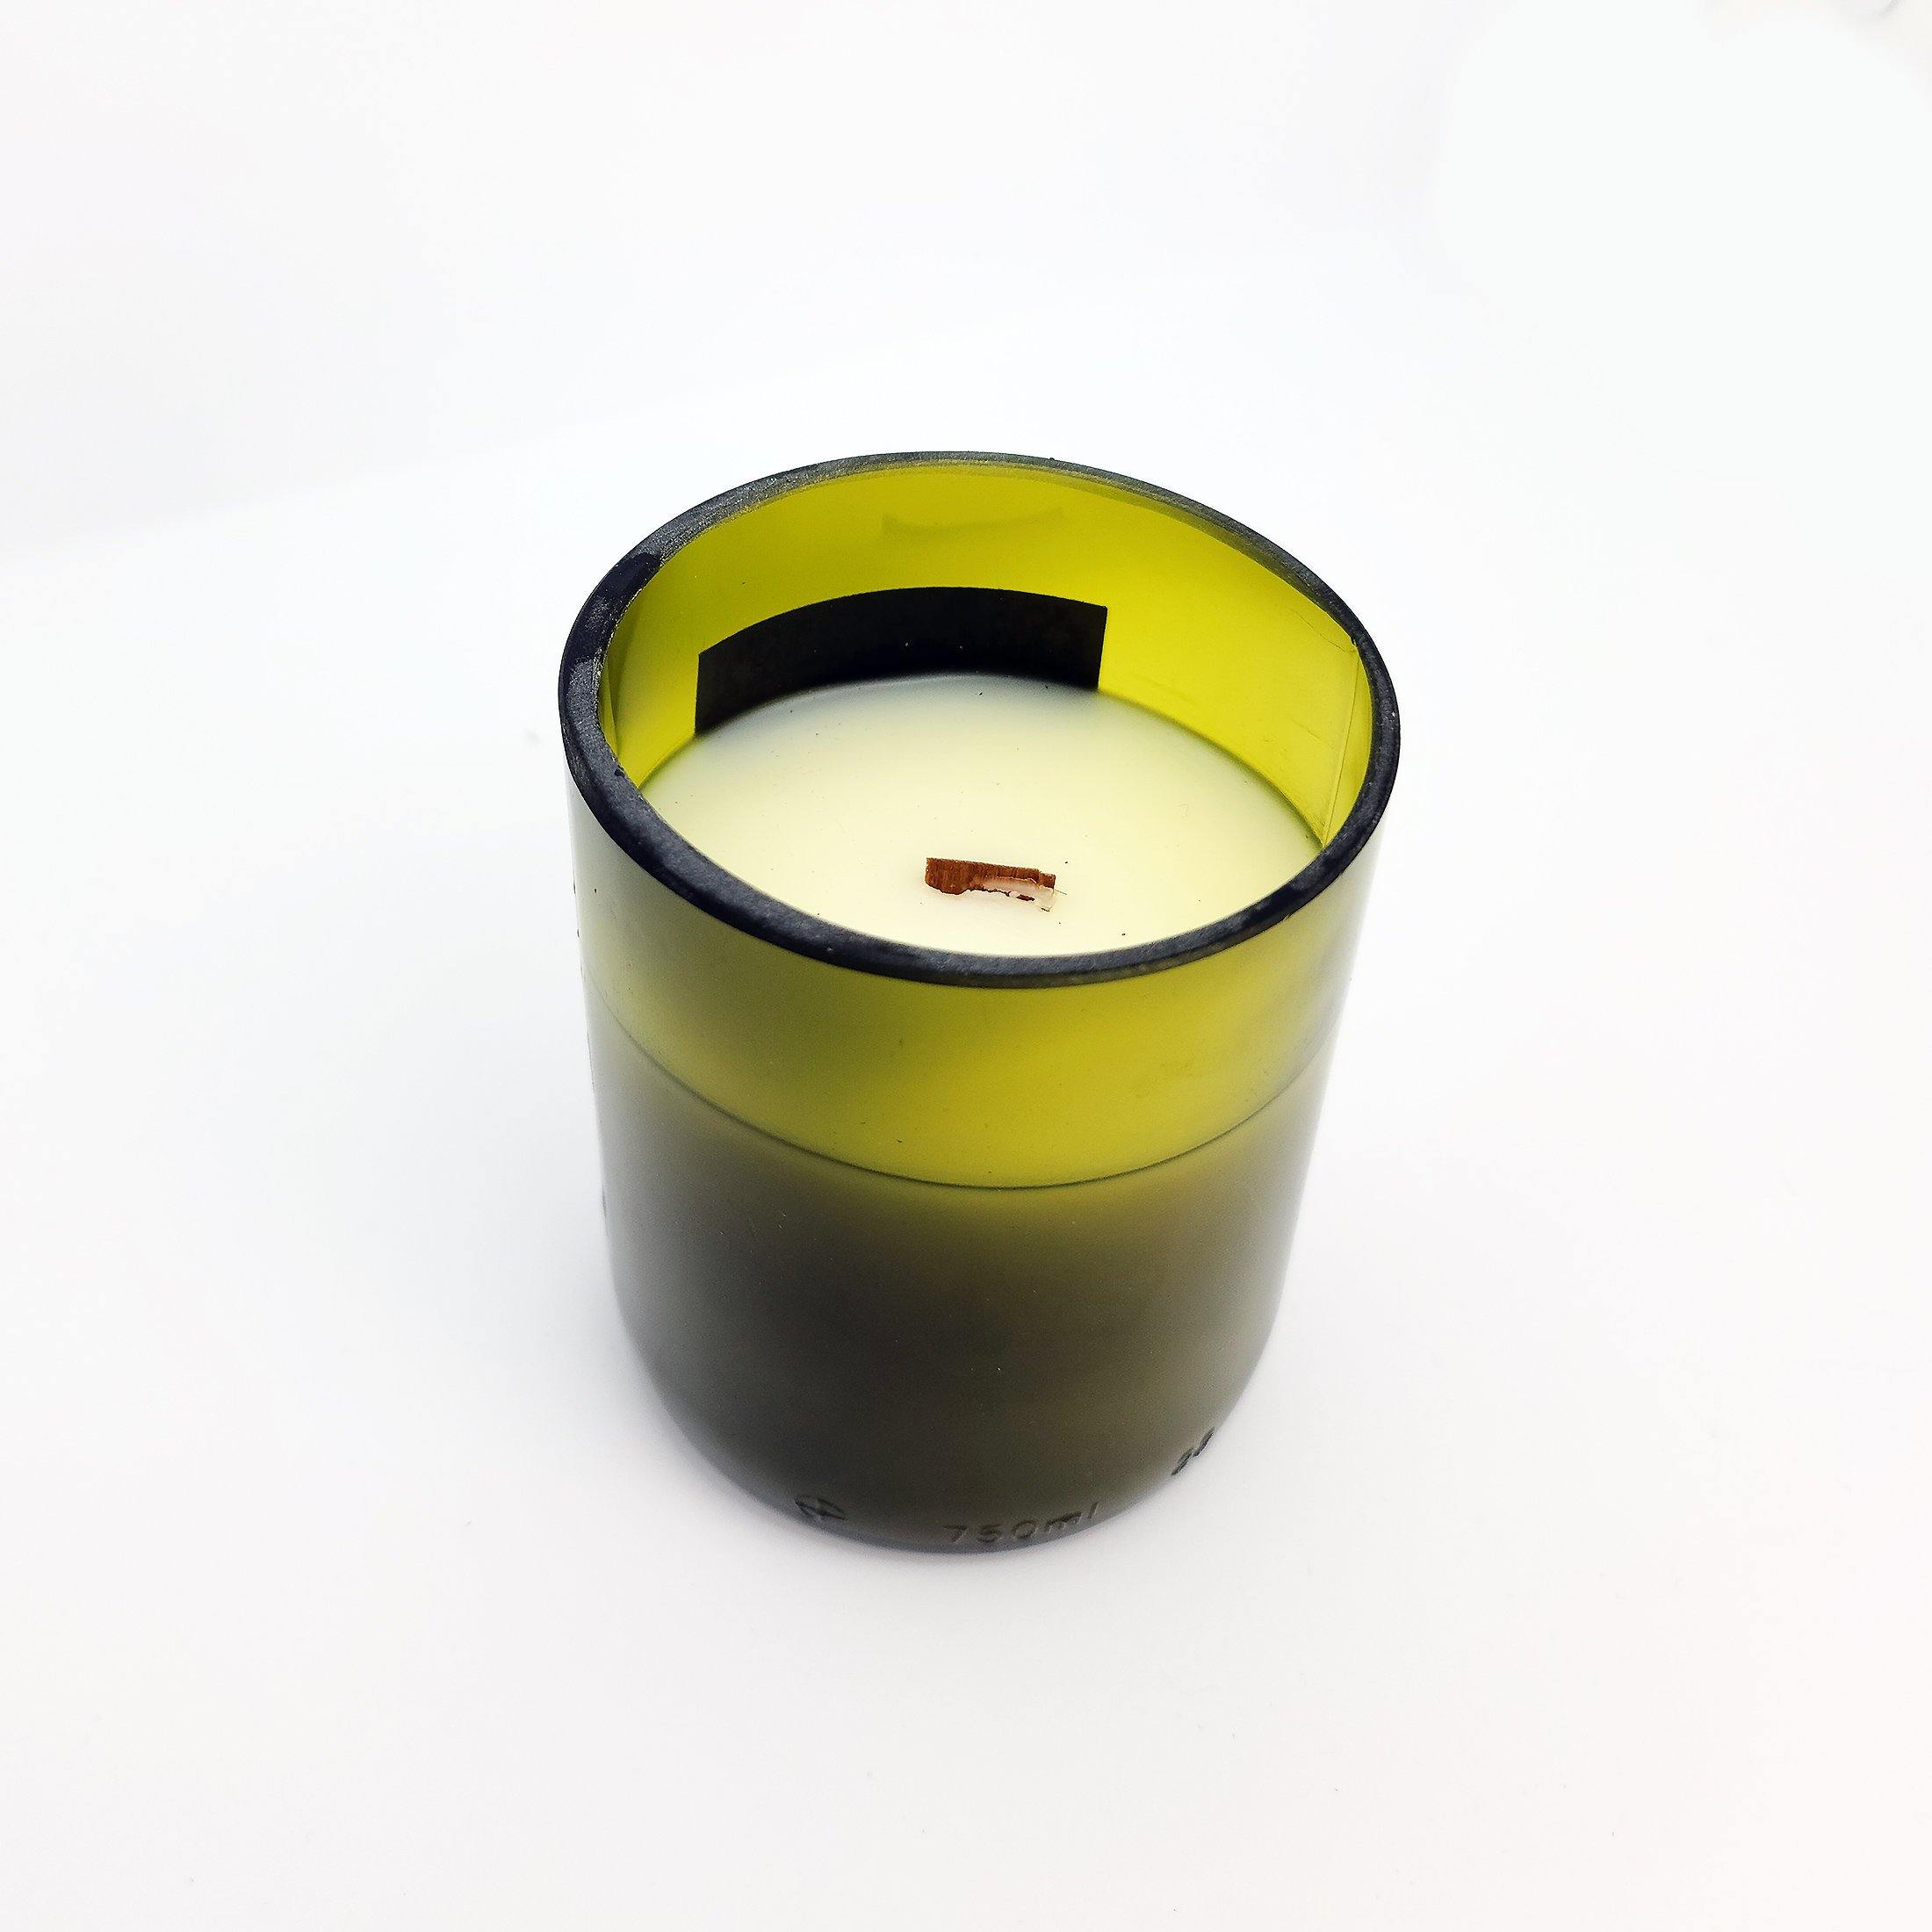 Cashemere & Vanilla Wooden Wick Scented Candle - LUVOCANDLES - Scented Wooden Wick Handmade in Montreal